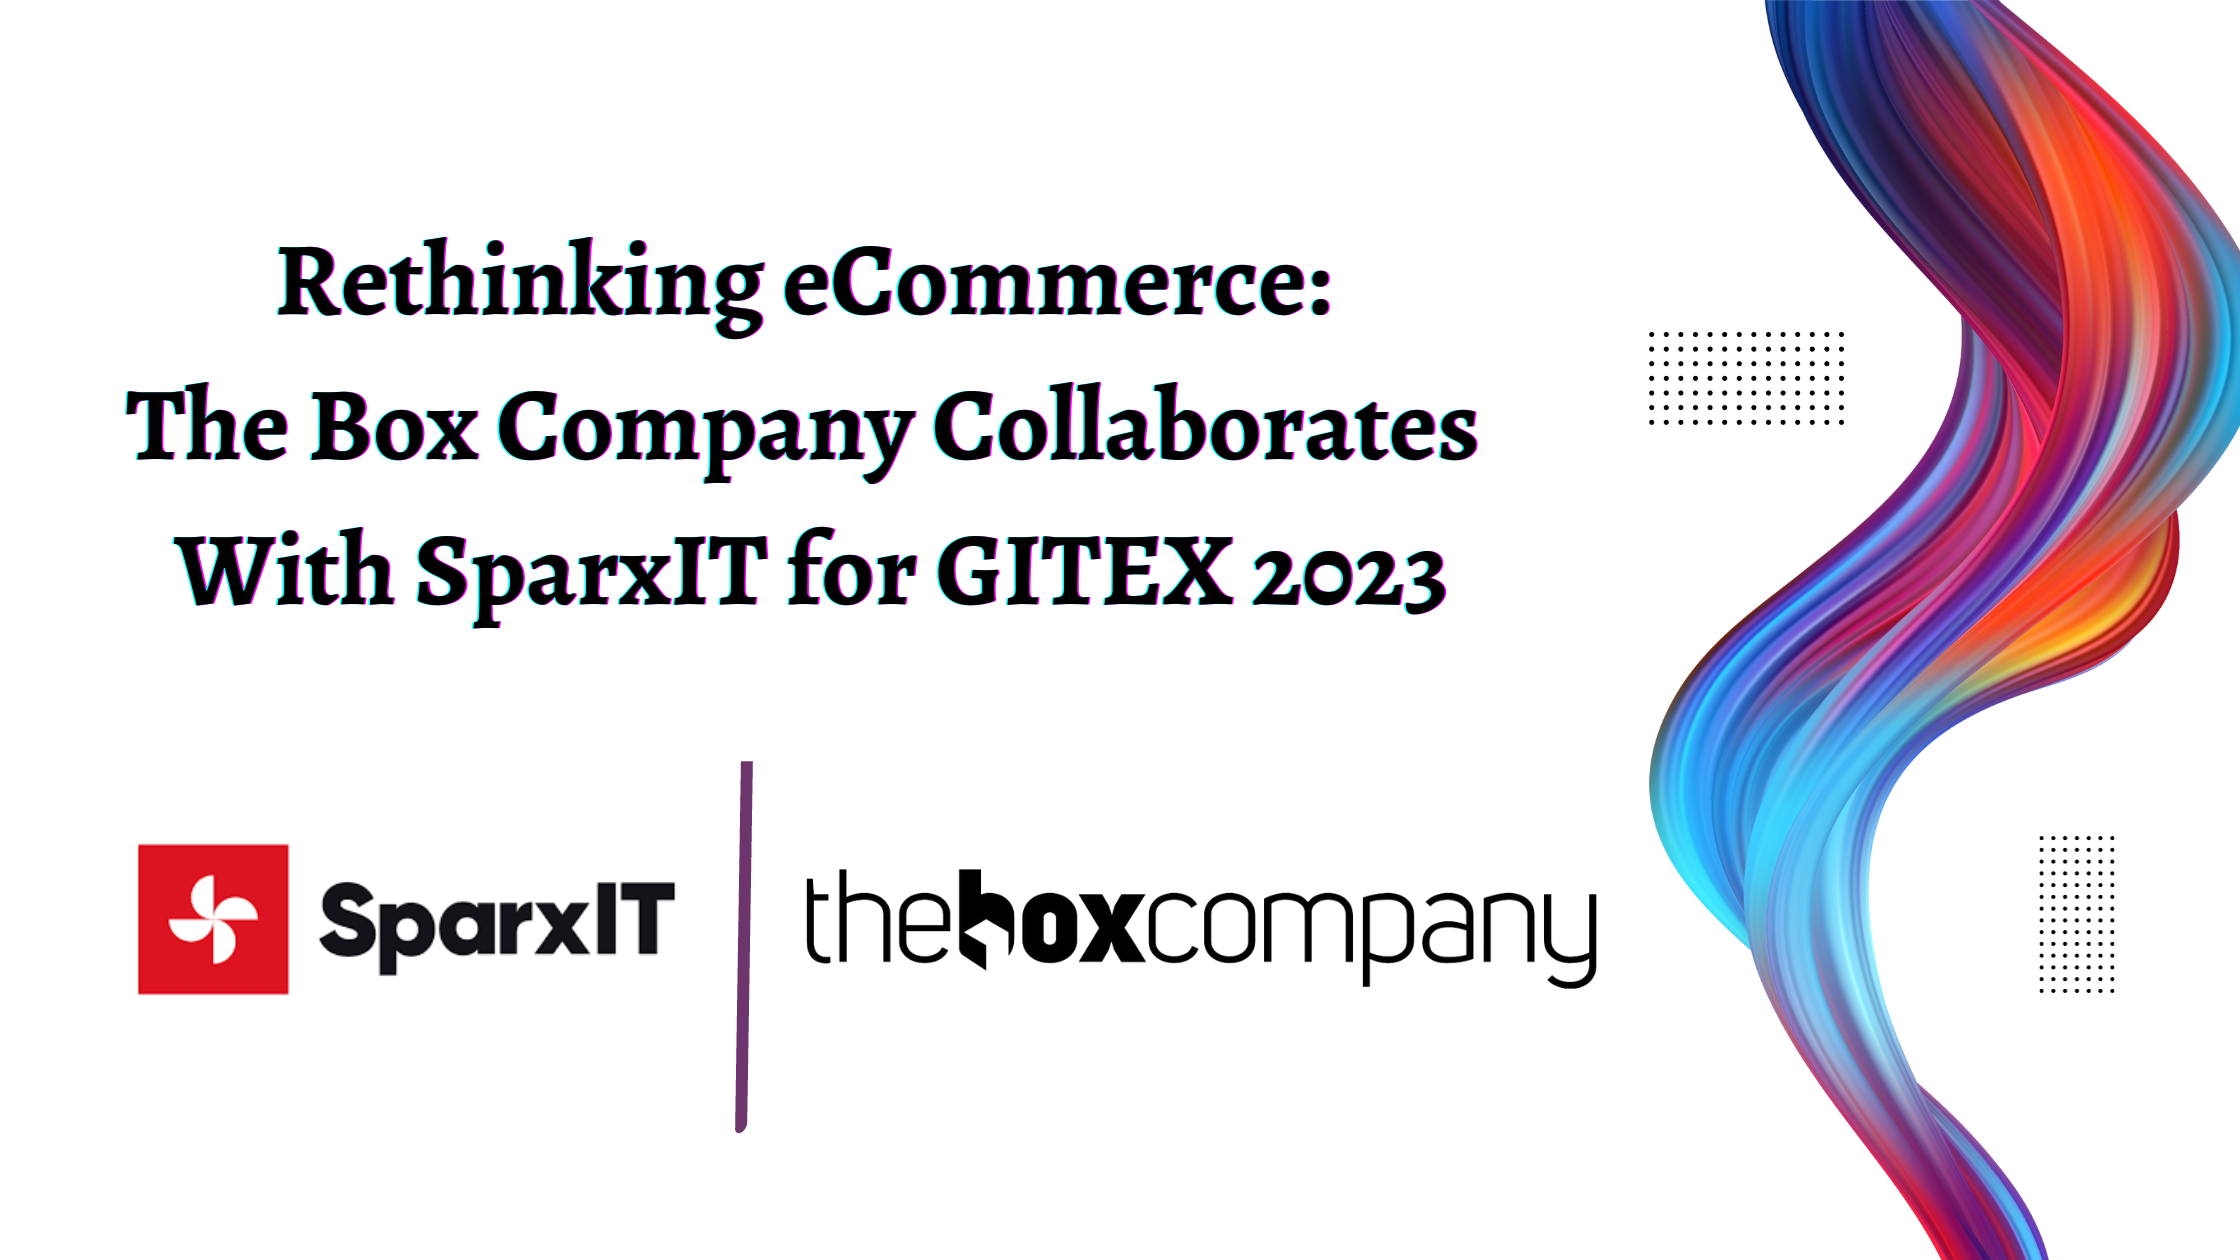 Rethinking eCommerce: The Box Company Collaborates With SparxIT for GITEX 2023